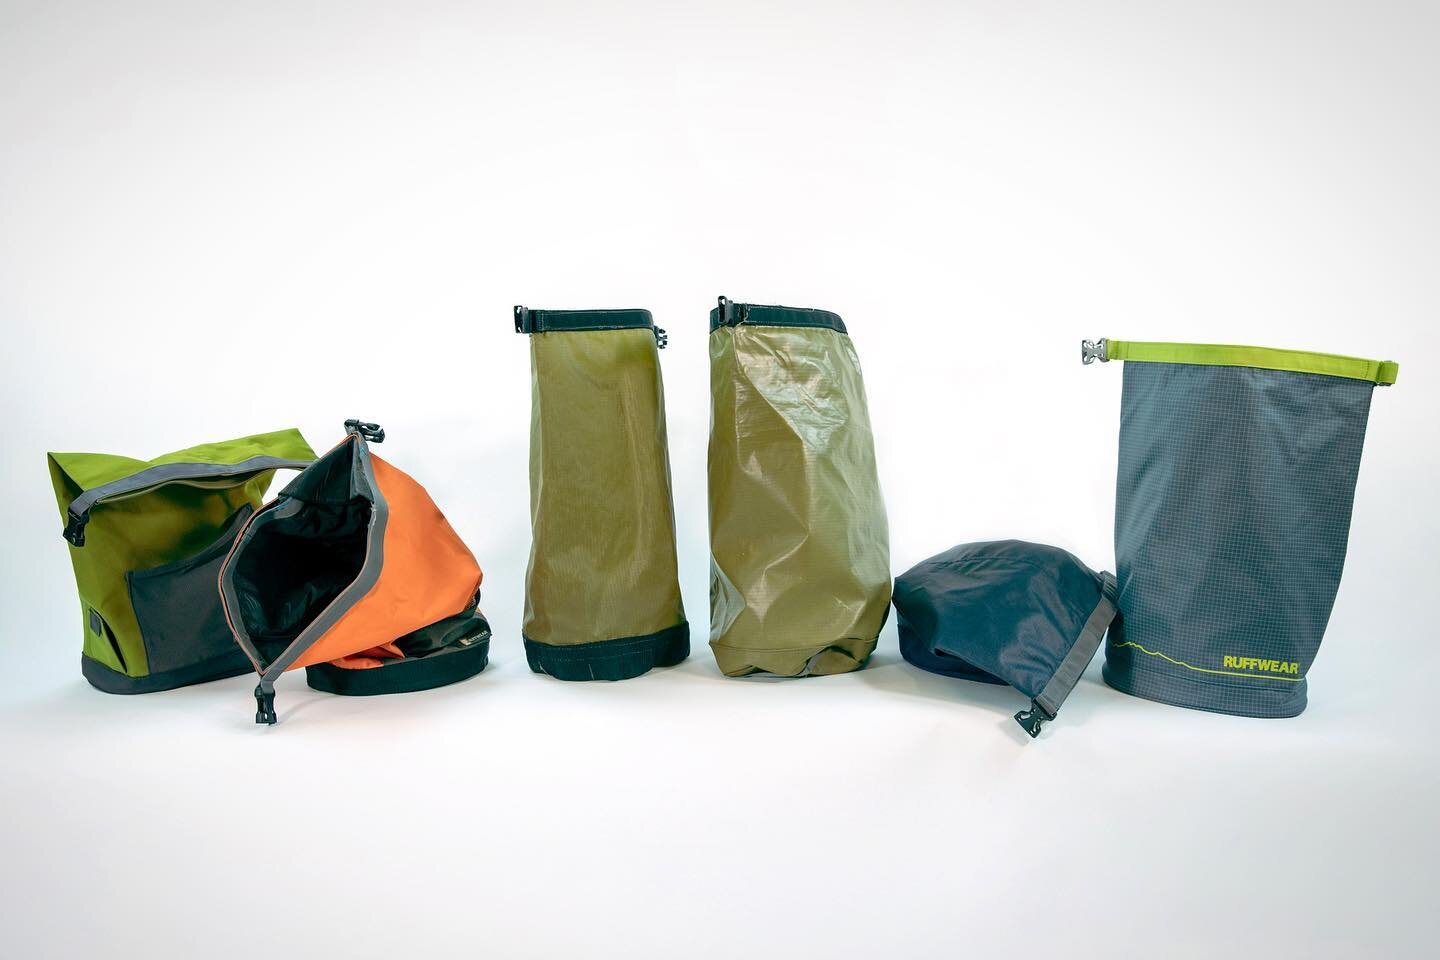 Ruffwear Kibble Kaddie | Prototyping

No matter how simple or complex the product may be, prototyping and testing are such key parts to the process of creating premium gear. This one was all about carrying and dispensing dog food - oily, smelly, mess